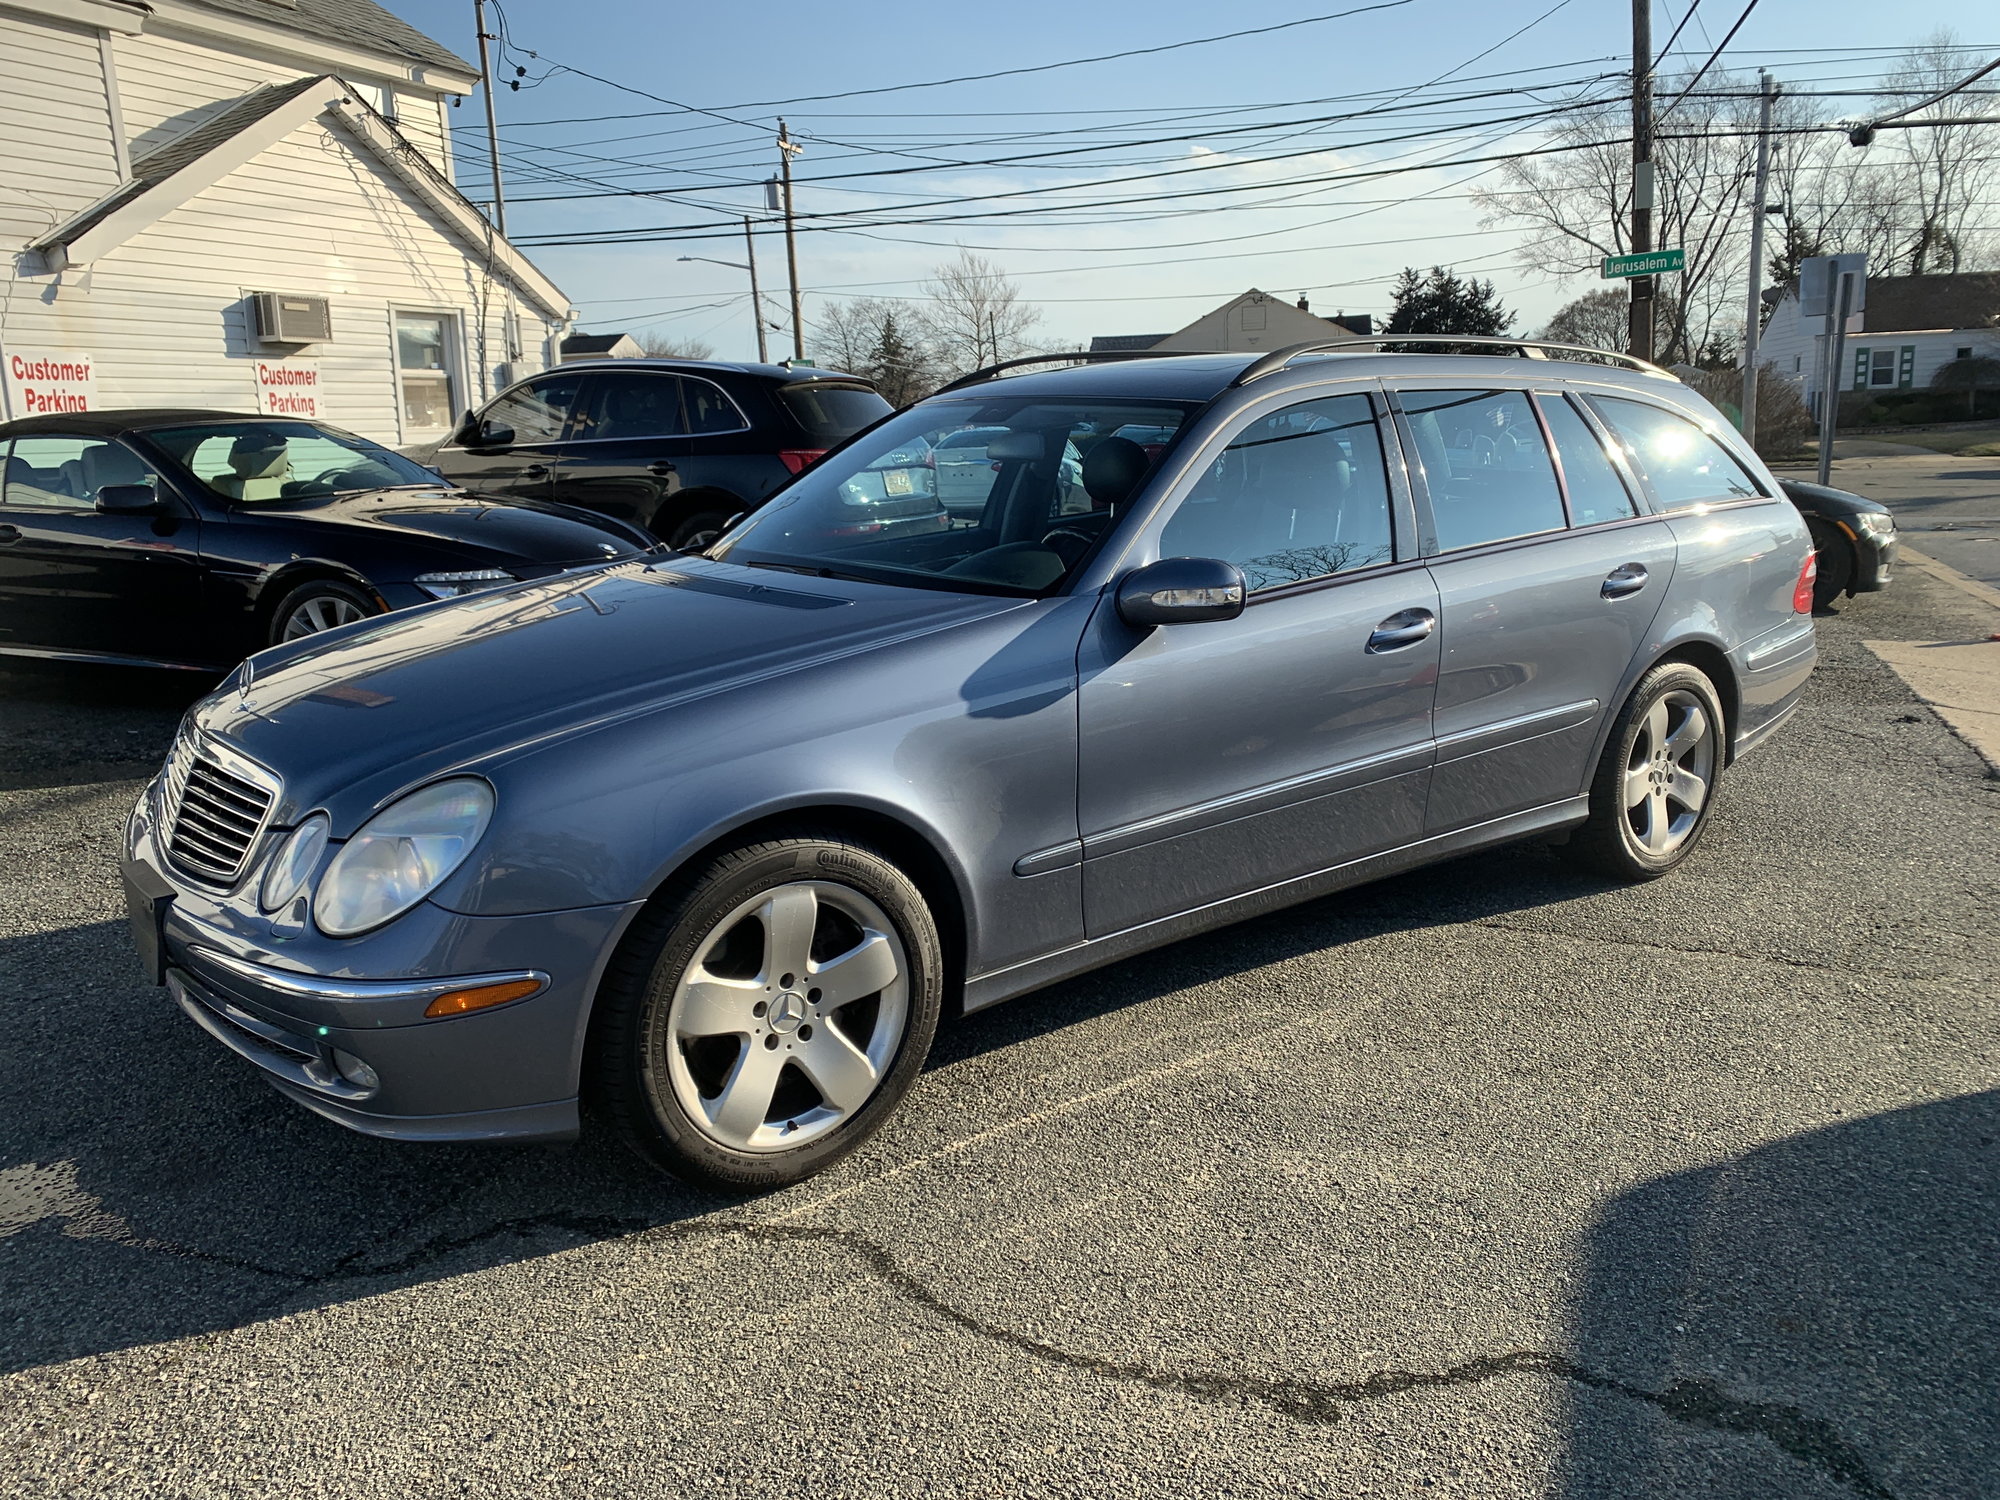 2005 Mercedes-Benz E500 - 2005 E500 4matic Wagon *3 owners, dealer maintained* - Used - VIN WDBUH83J35X165664 - 139,000 Miles - 8 cyl - 4WD - Automatic - Wagon - Blue - Merrick, NY 11566, United States